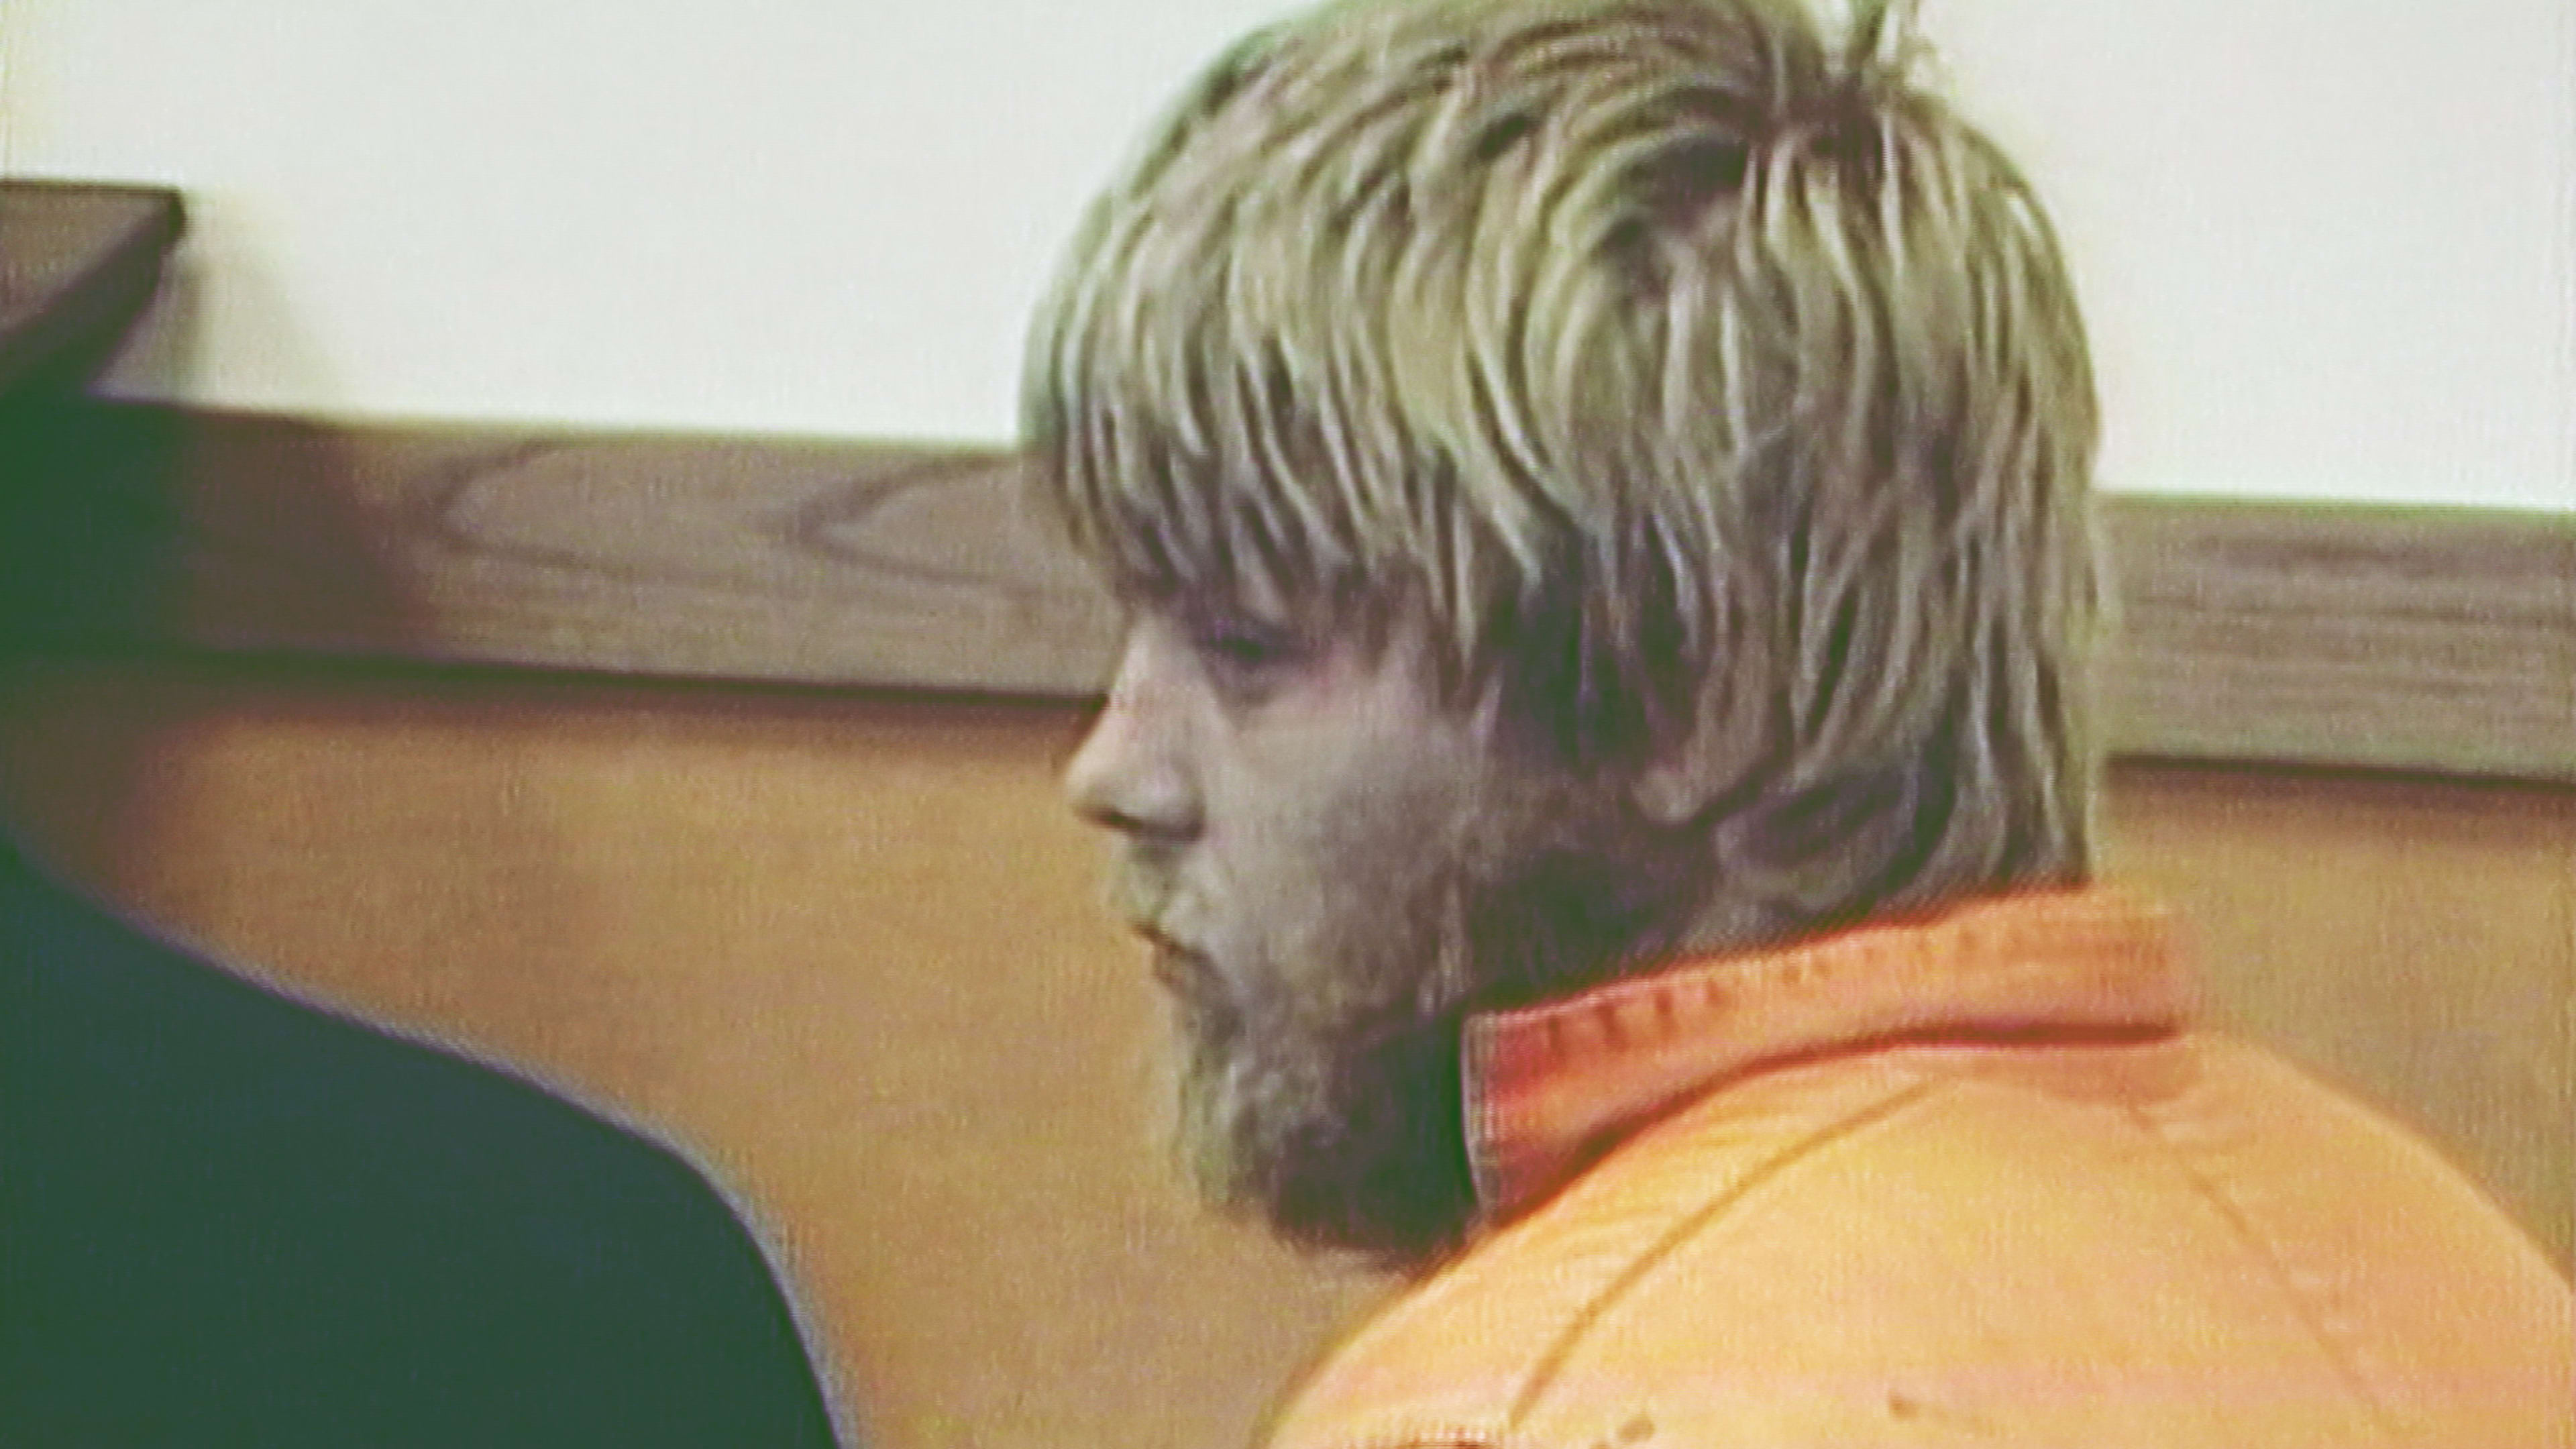 New “Making A Murderer” Series To Tell Other Side Of The Story